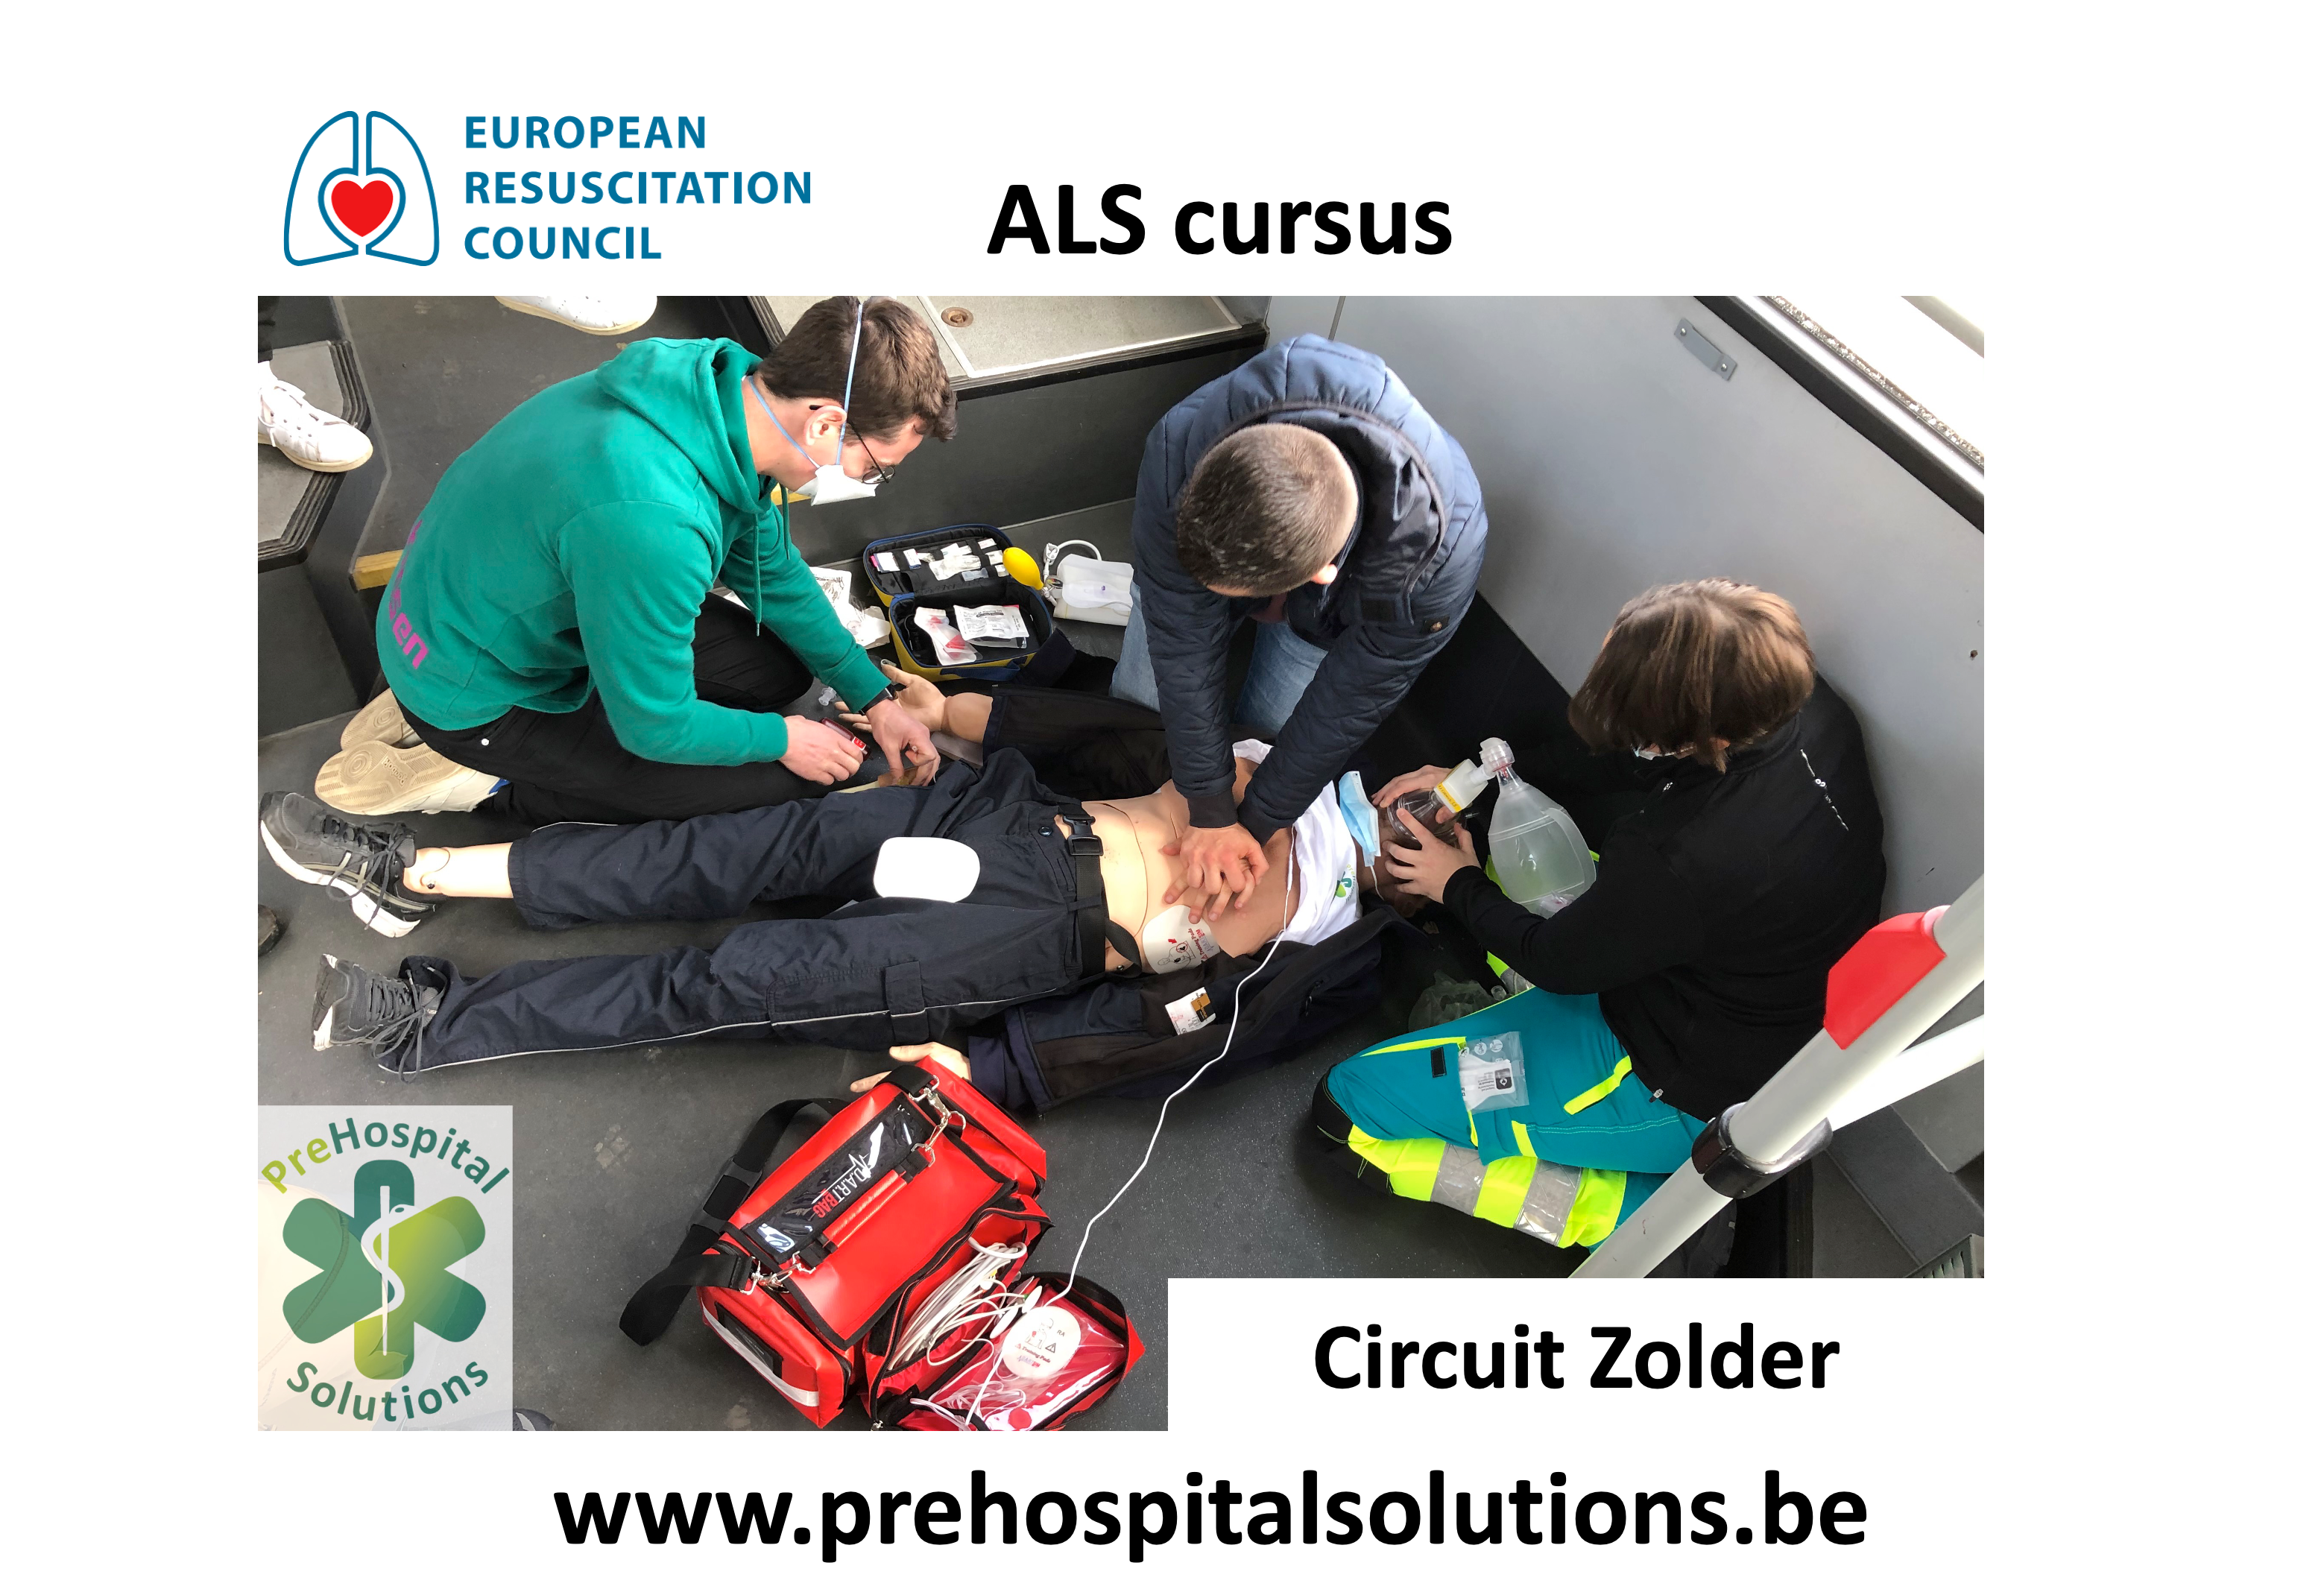 ERC Advanced Life Support cursus in november